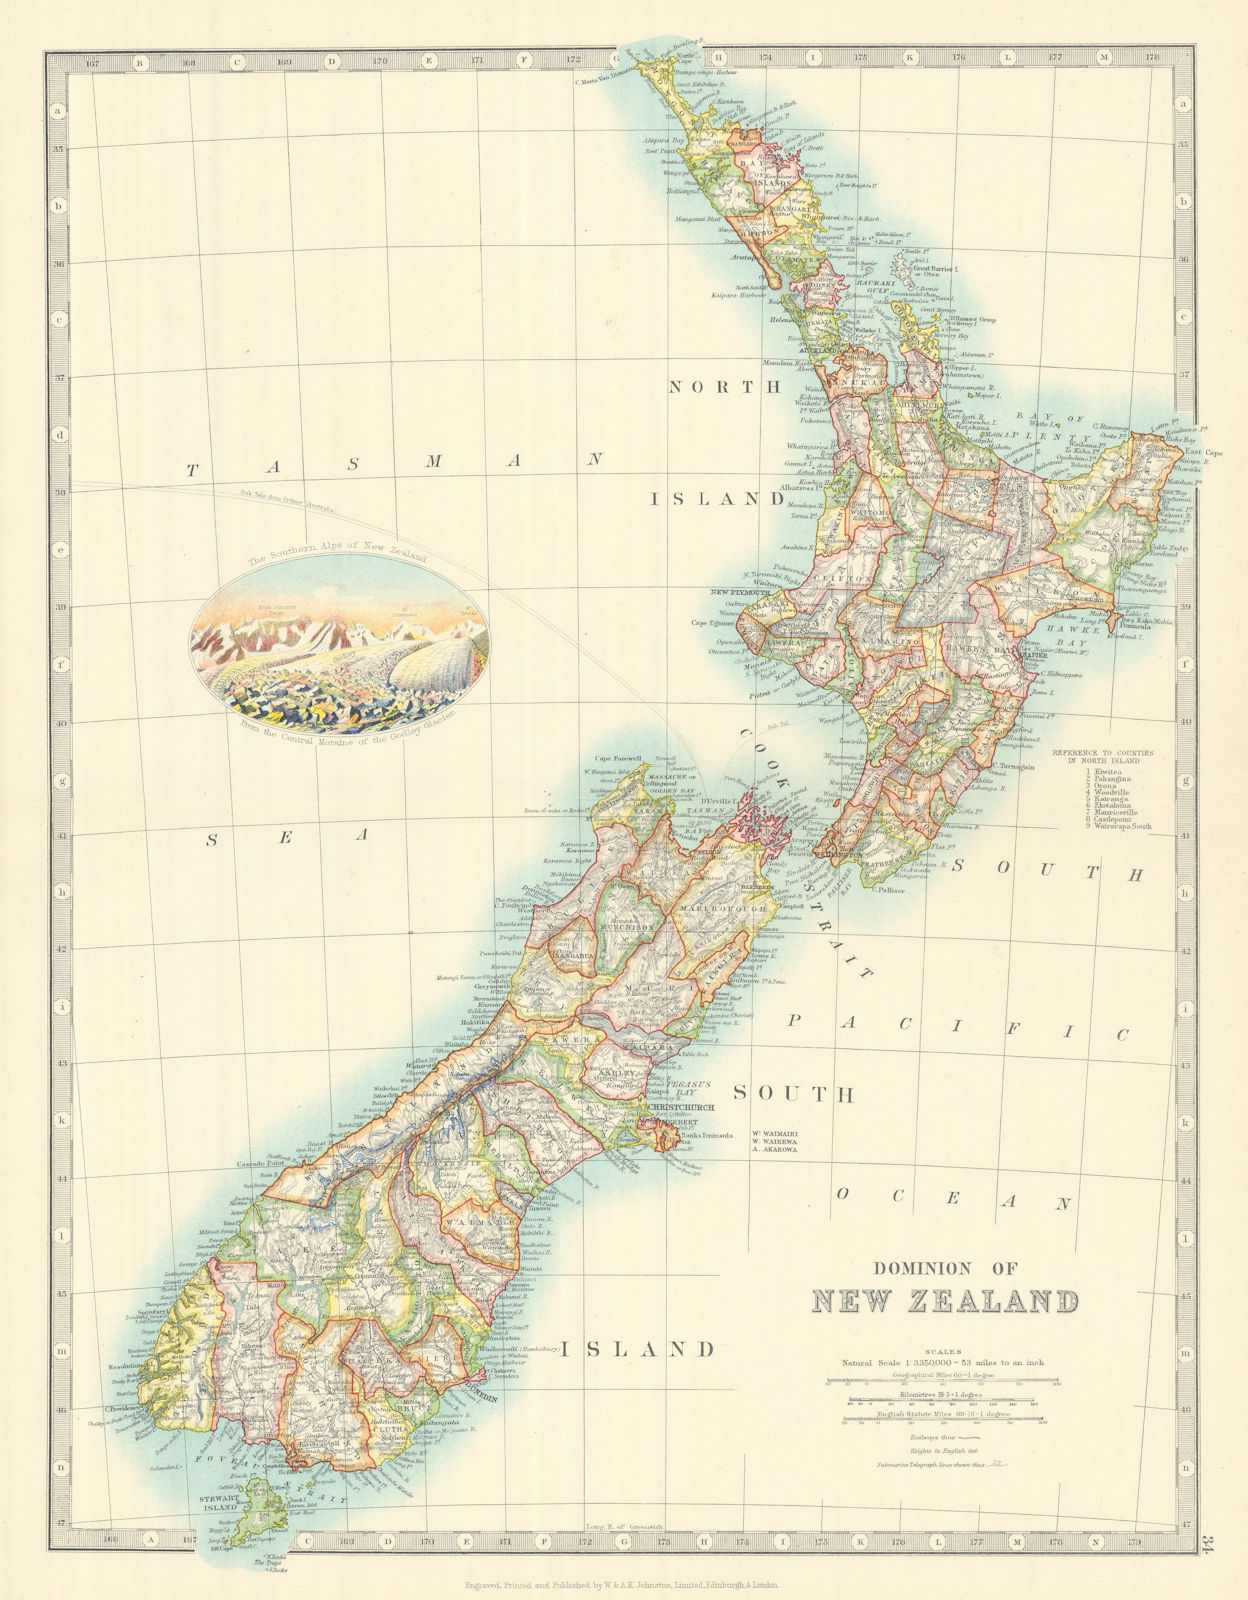 DOMINION OF NEW ZEALAND in counties. Godley Glacier vignette. JOHNSTON 1913 map